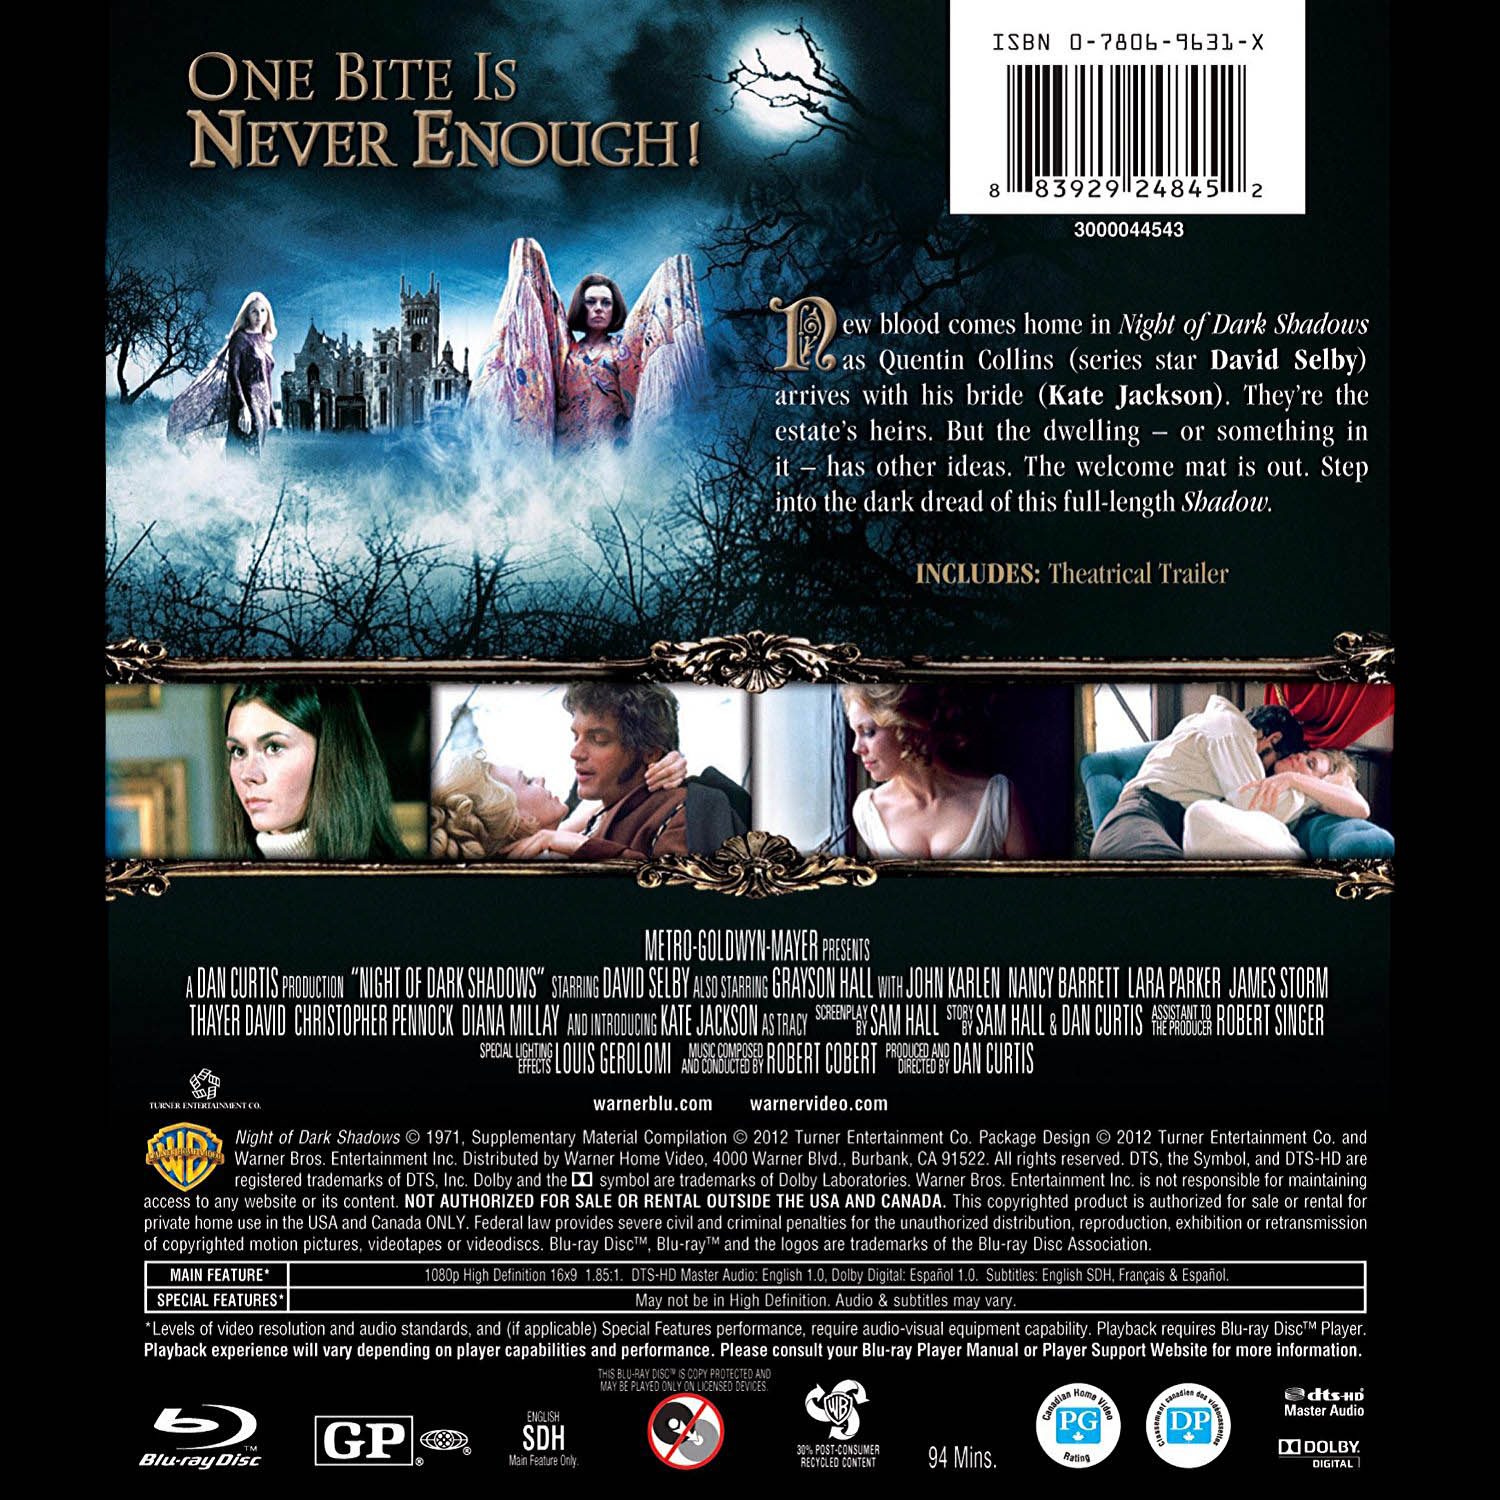 A world of something. Shadow DVD Cover. In search of Darkness 3 Blu ray. My Dark Shadow Cover. Night of Shadows 32.